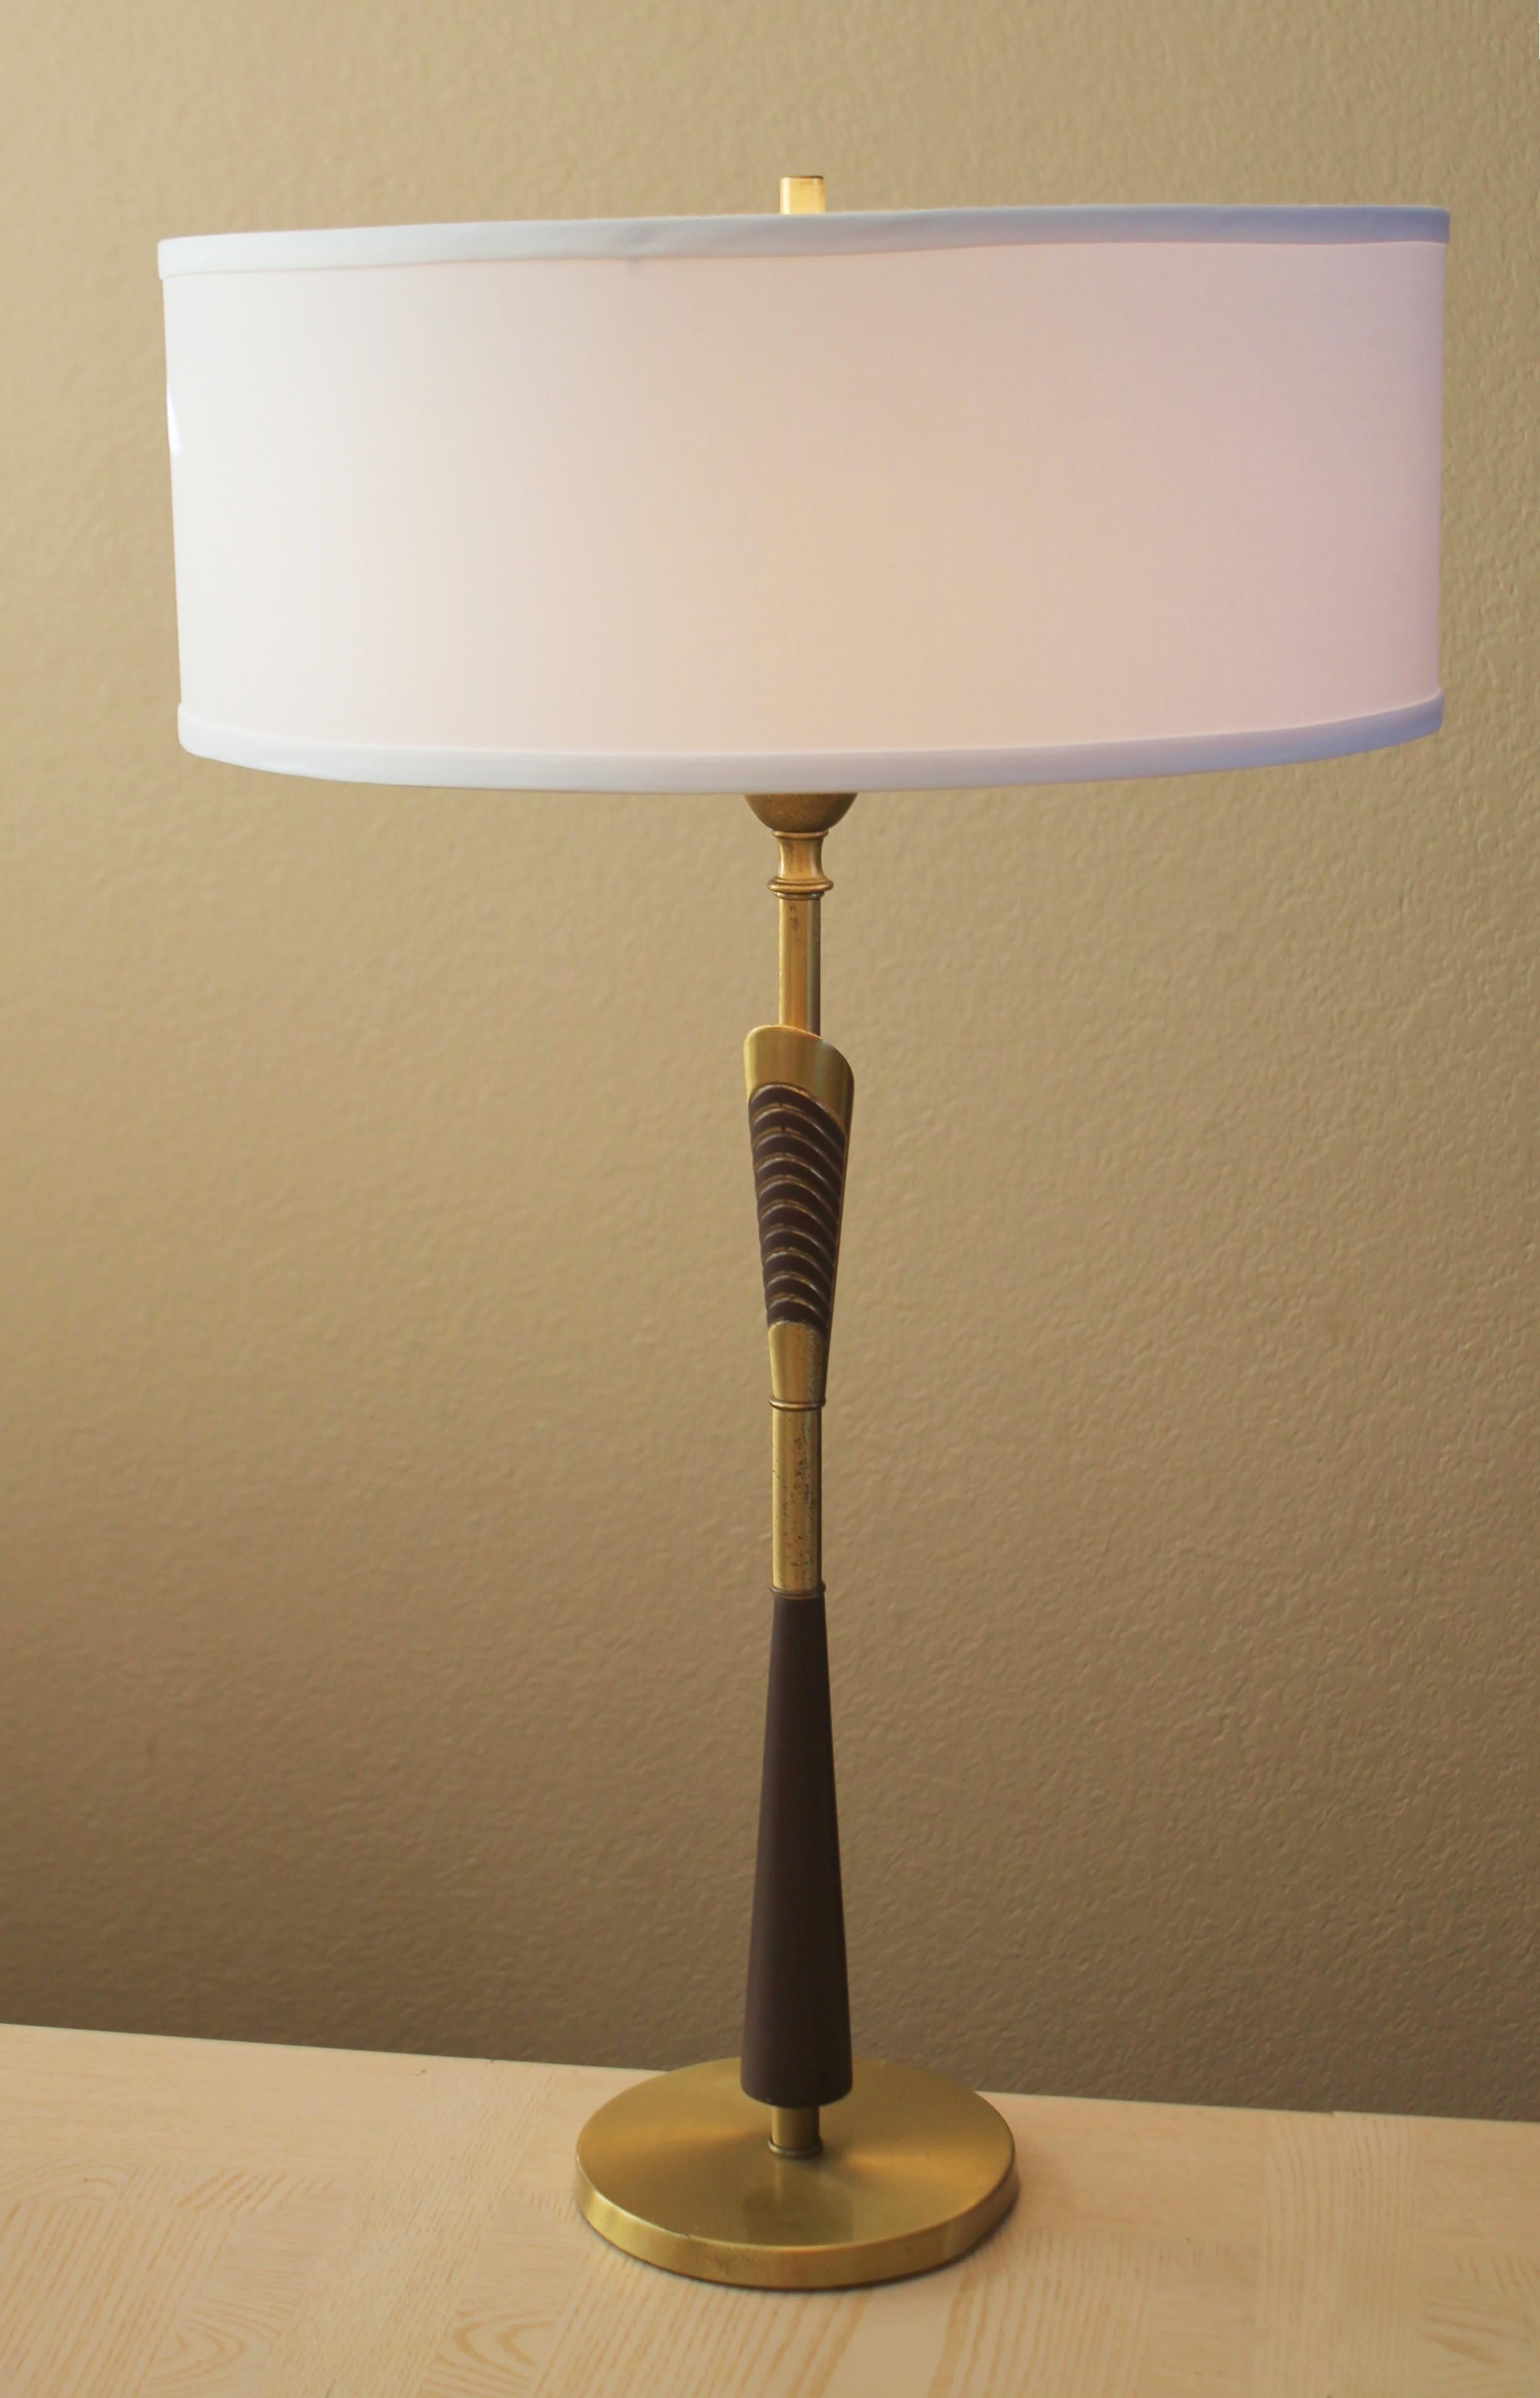 Rare Rembrandt Mid Century Modern Table Lamp! Atomic Ranch Decor! MCM 1950s In Good Condition For Sale In Peoria, AZ